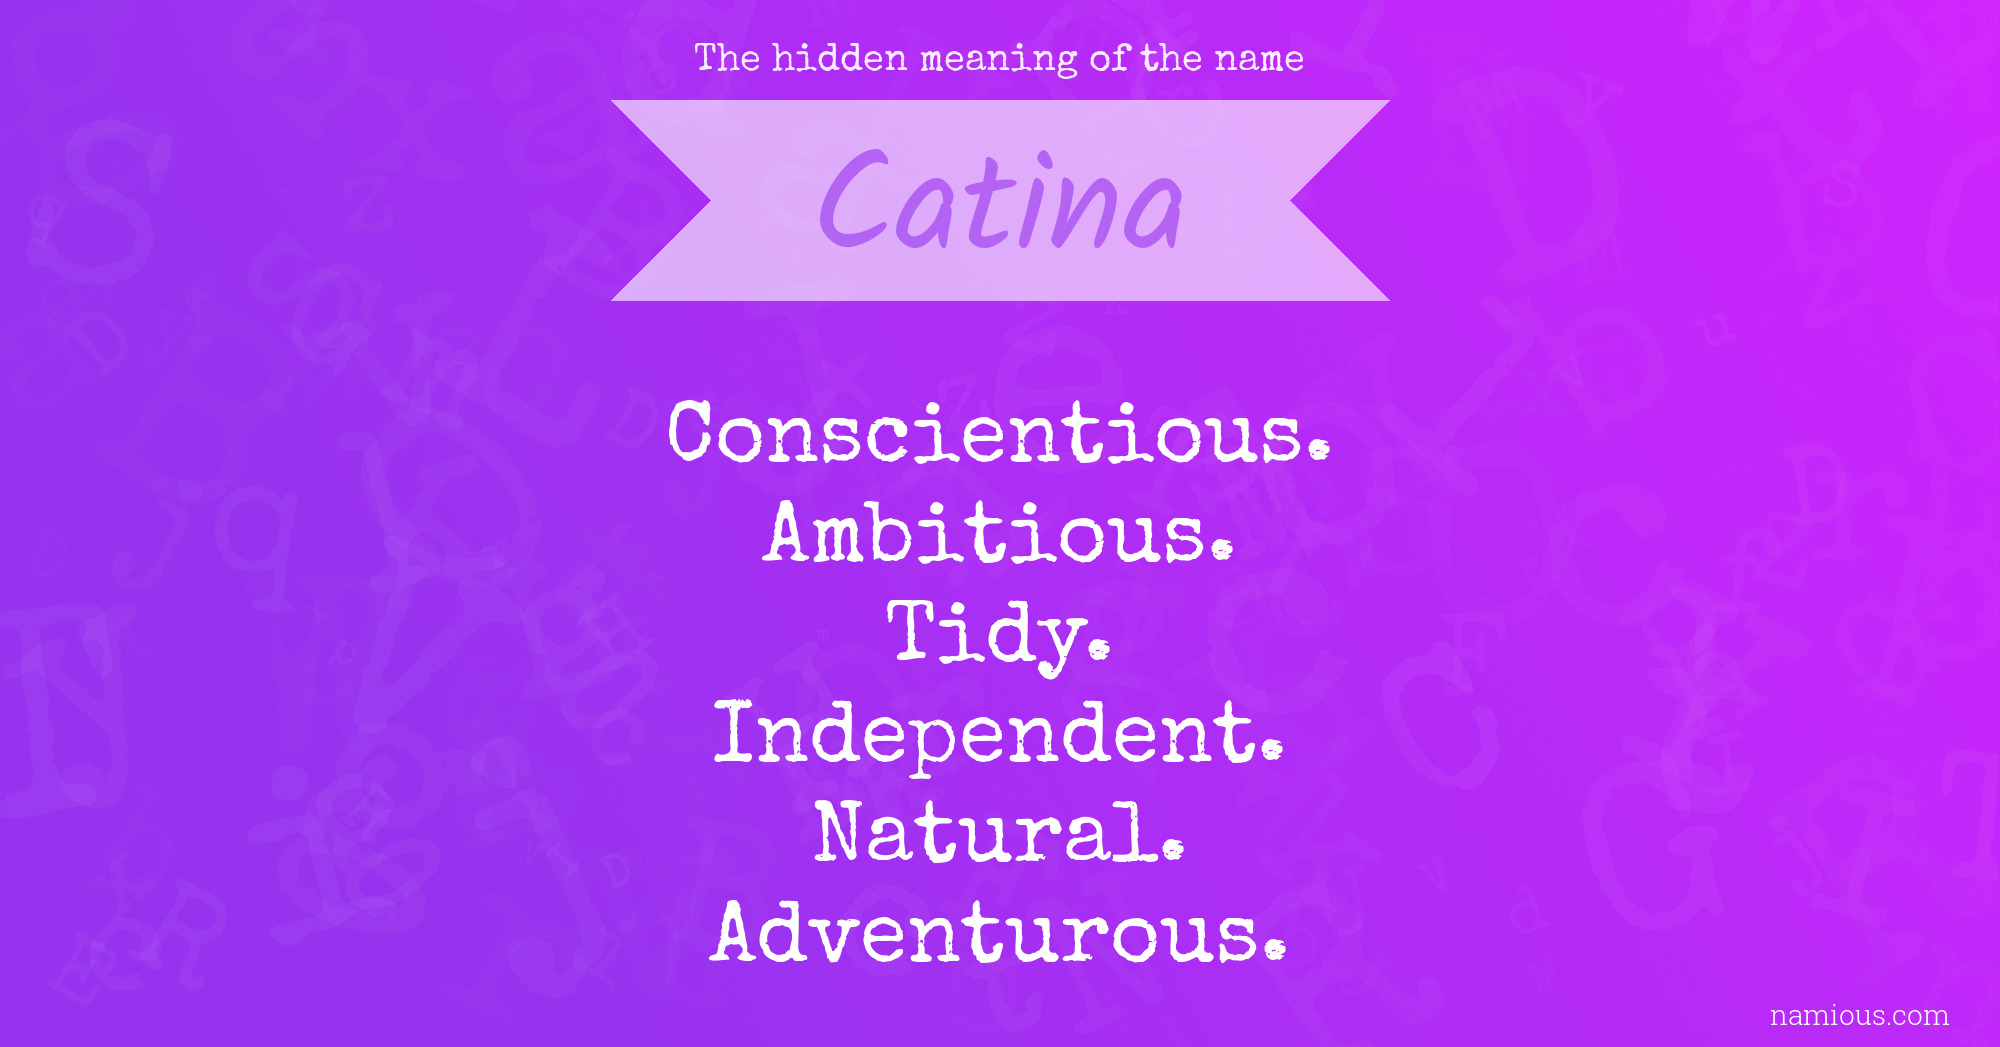 The hidden meaning of the name Catina